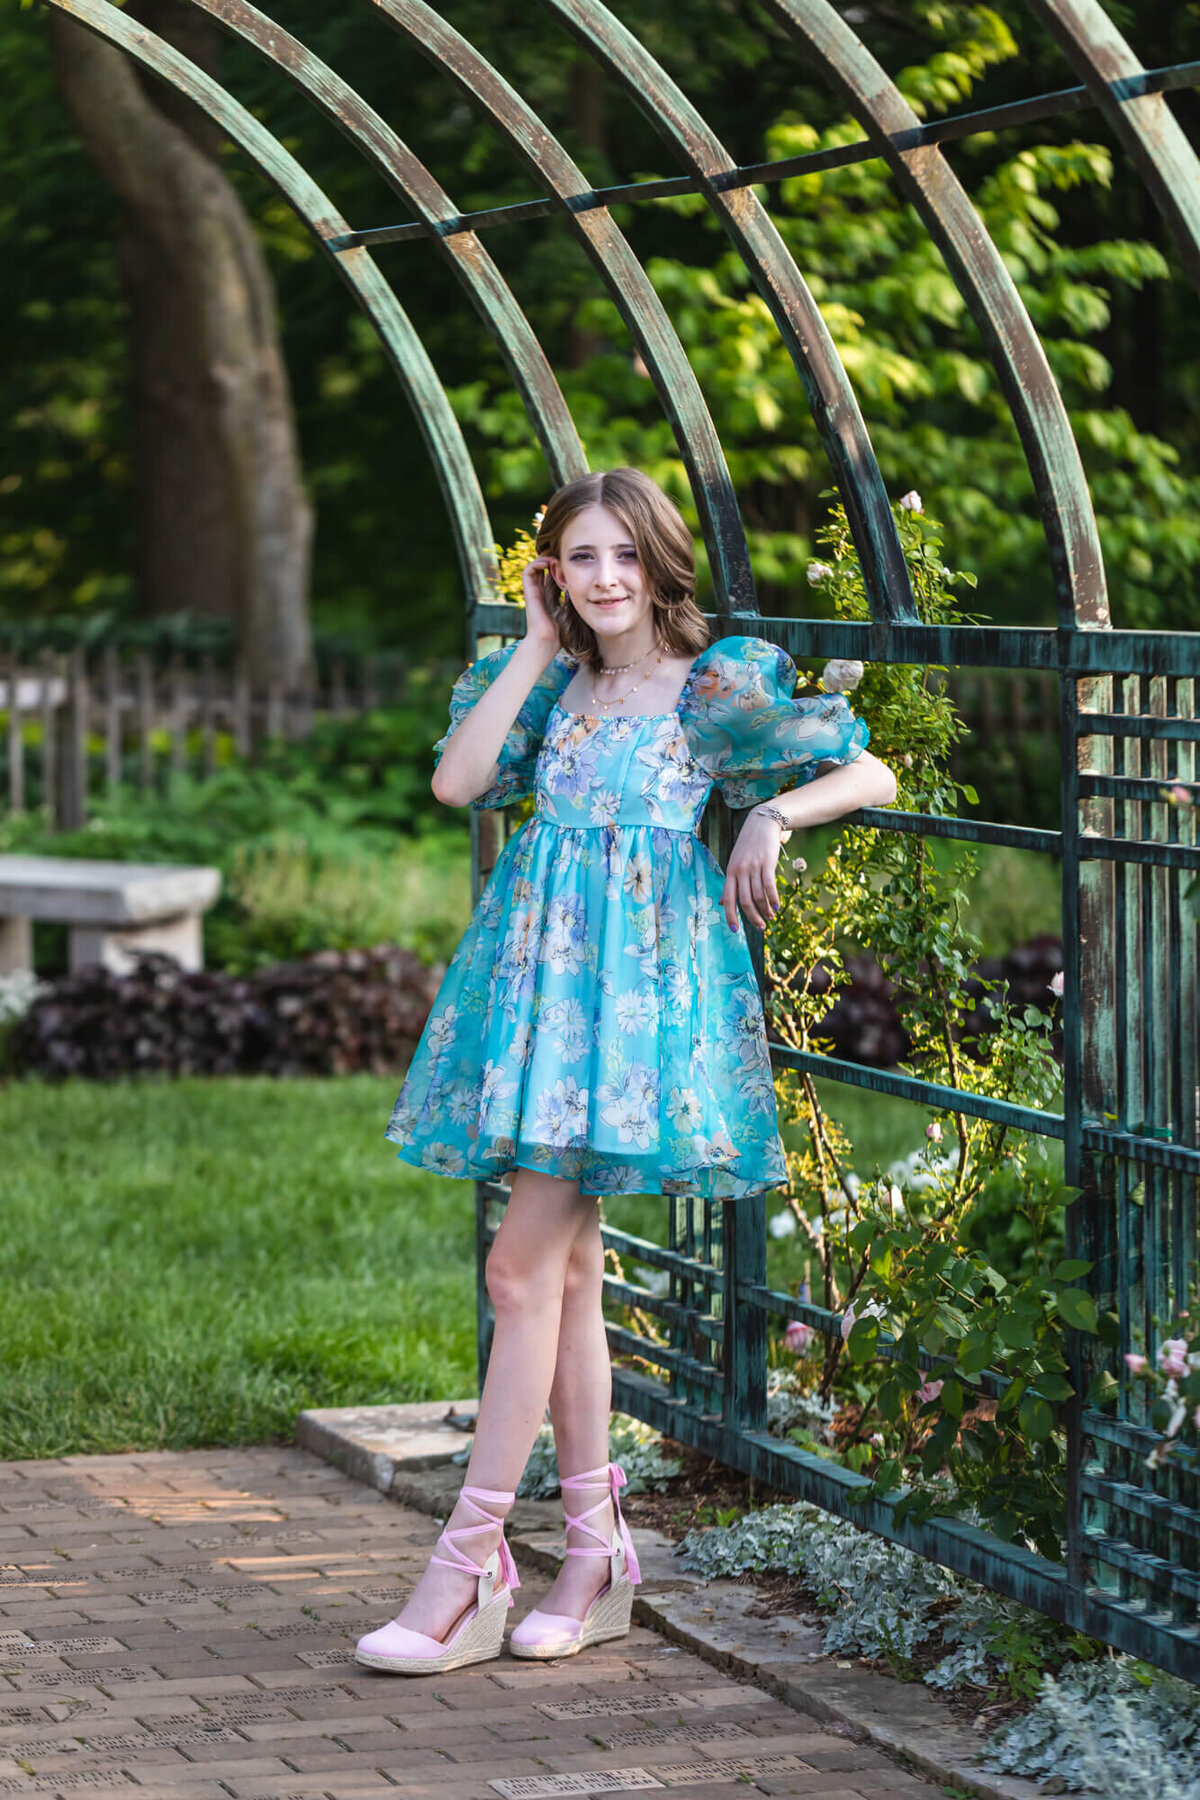 Lovely young teenage girl in a blue floral dress and pink shoes leaning on a garden trellis surrounded by roses. Captured by Springfield, MO teen photographer Dynae Levingston.